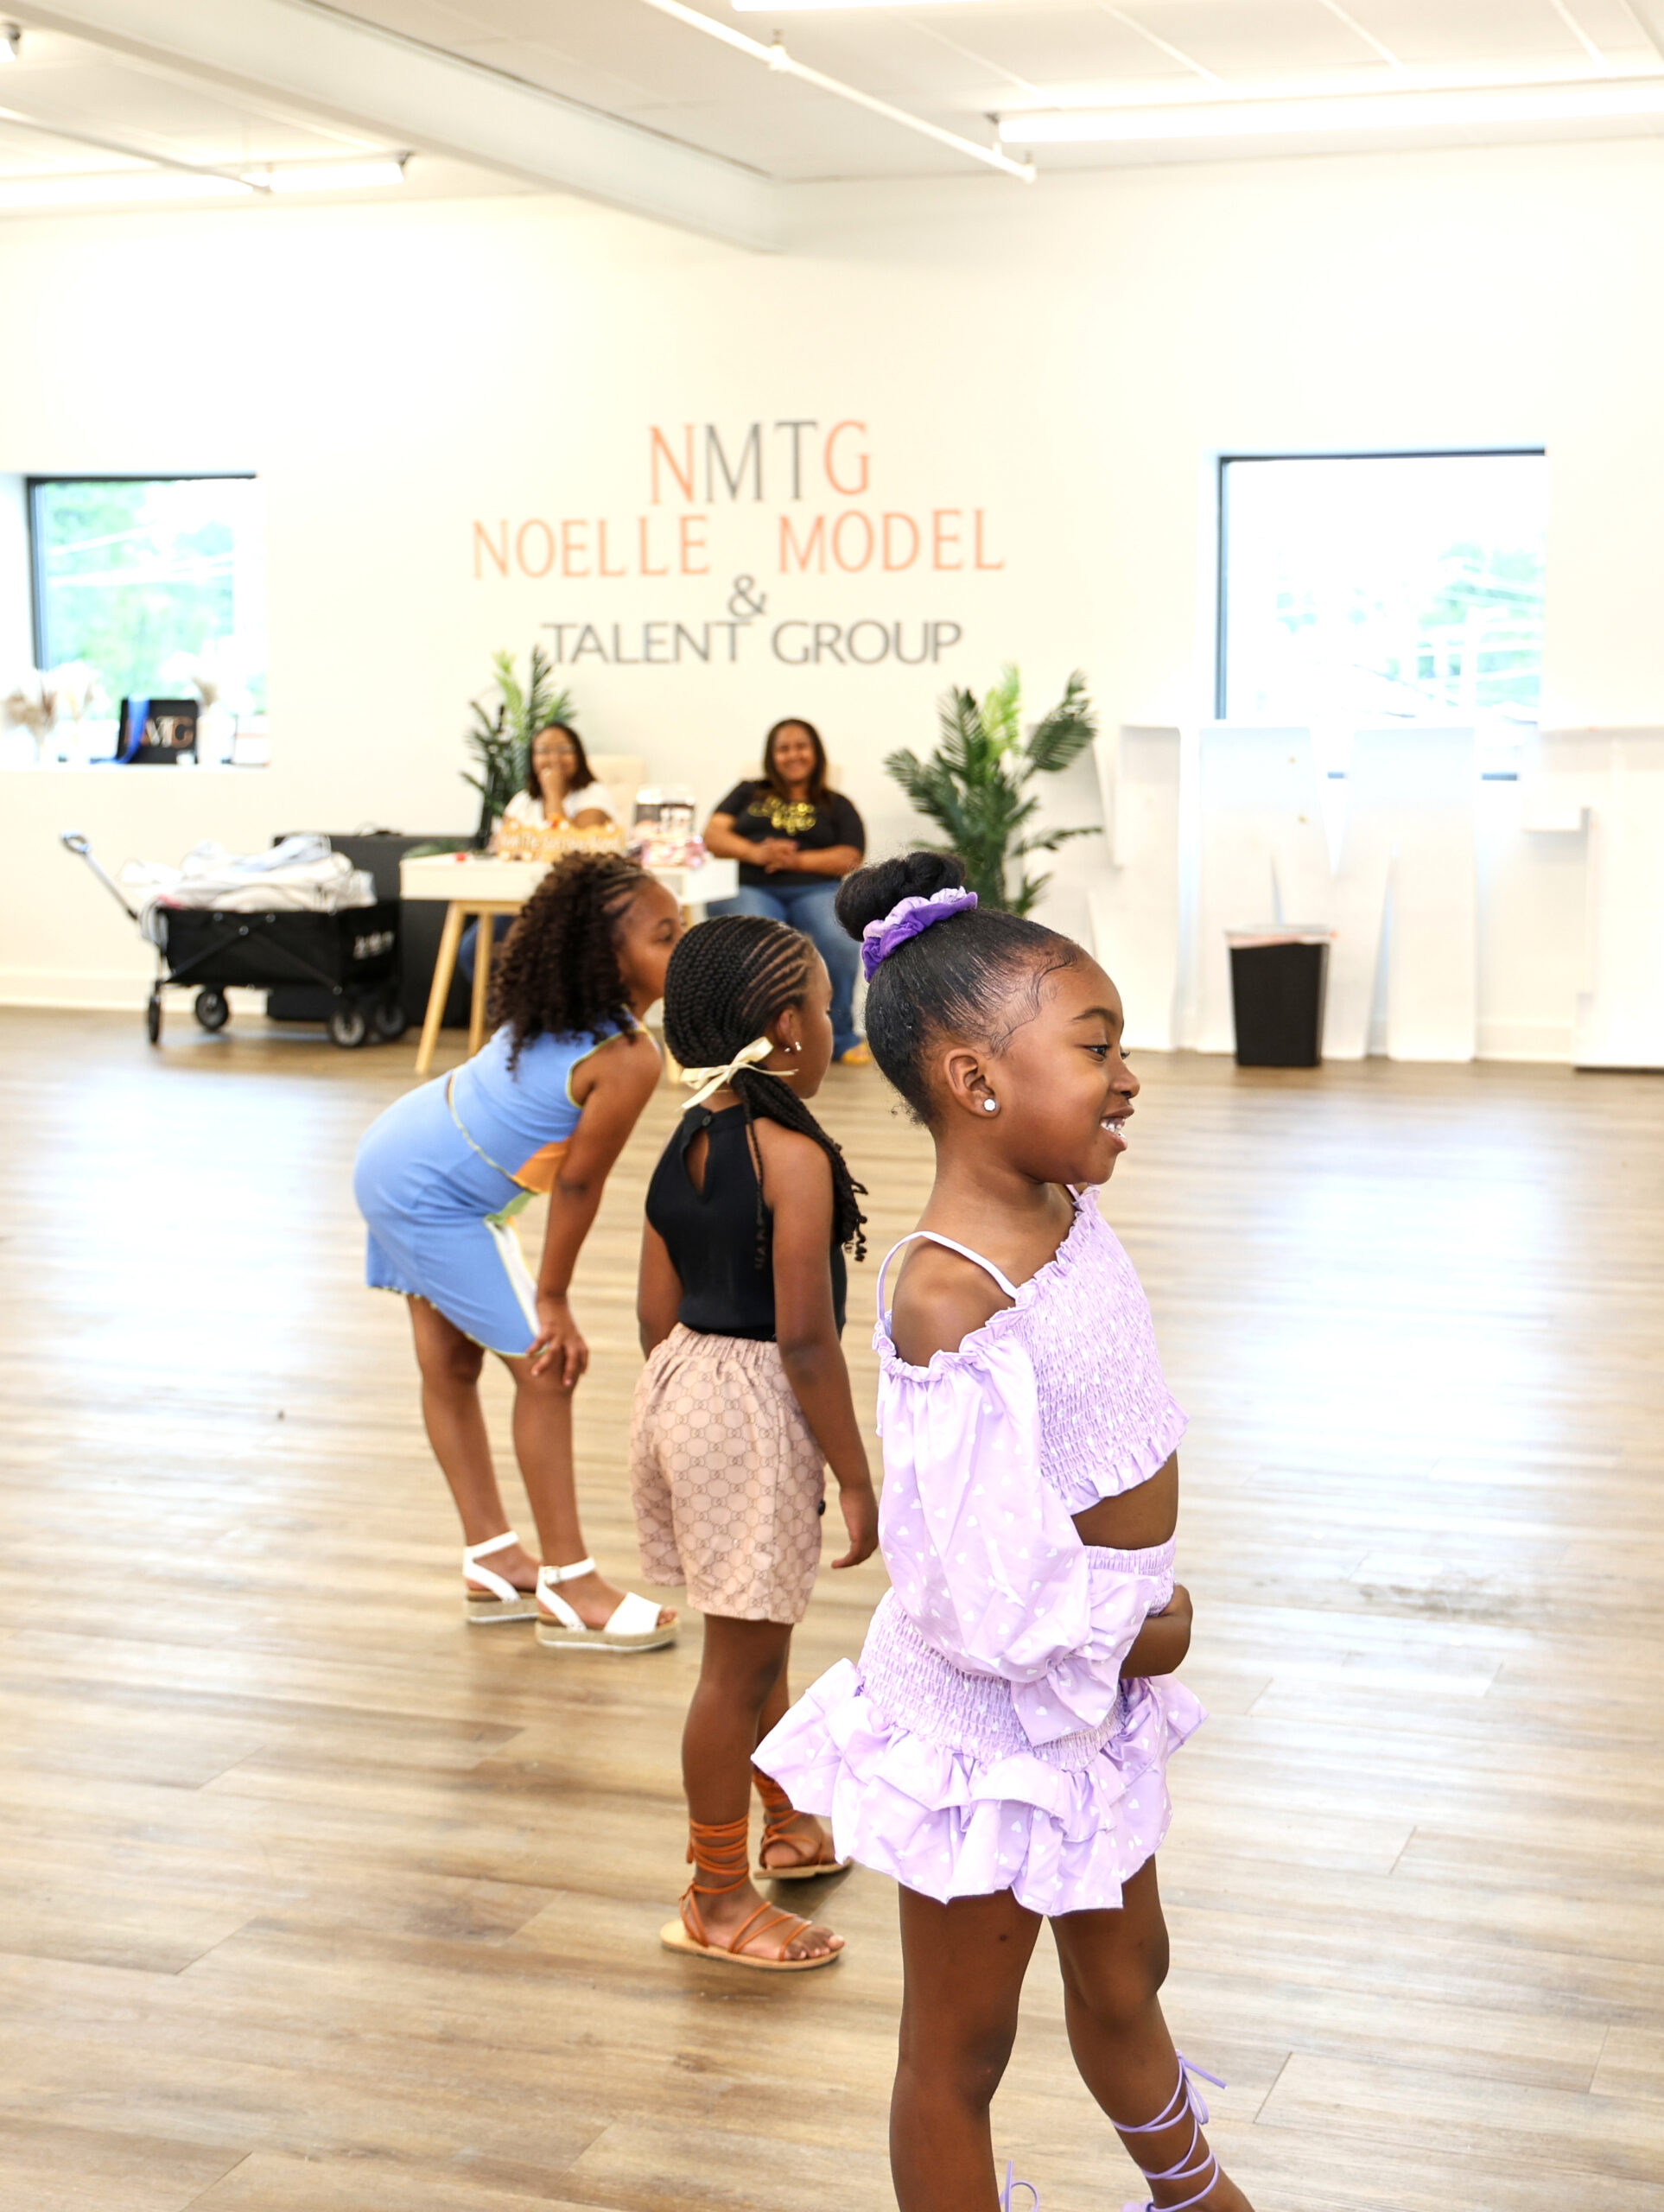 Kids at Noelle Model Talent Group practicing their modeling.